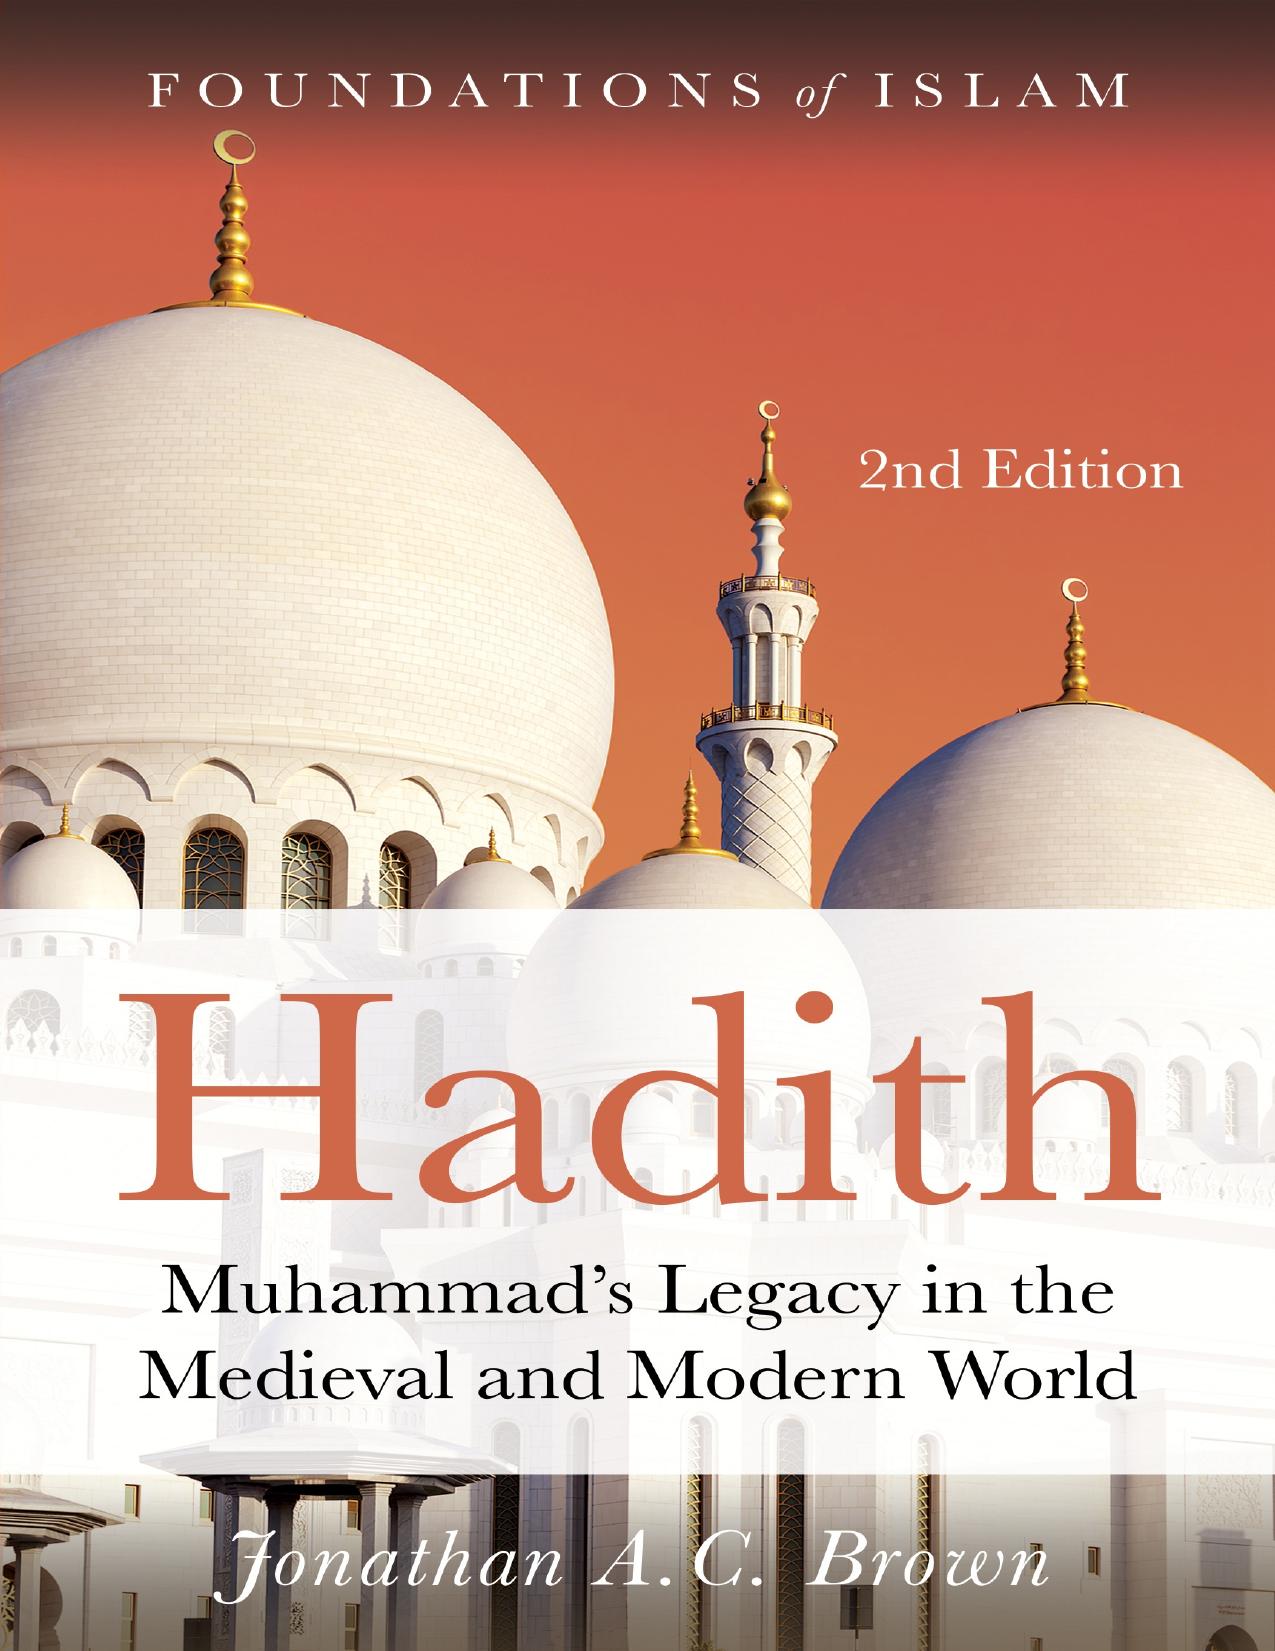 Hadith: Muhammad’s legacy in the medieval and modern world - PDFDrive.com